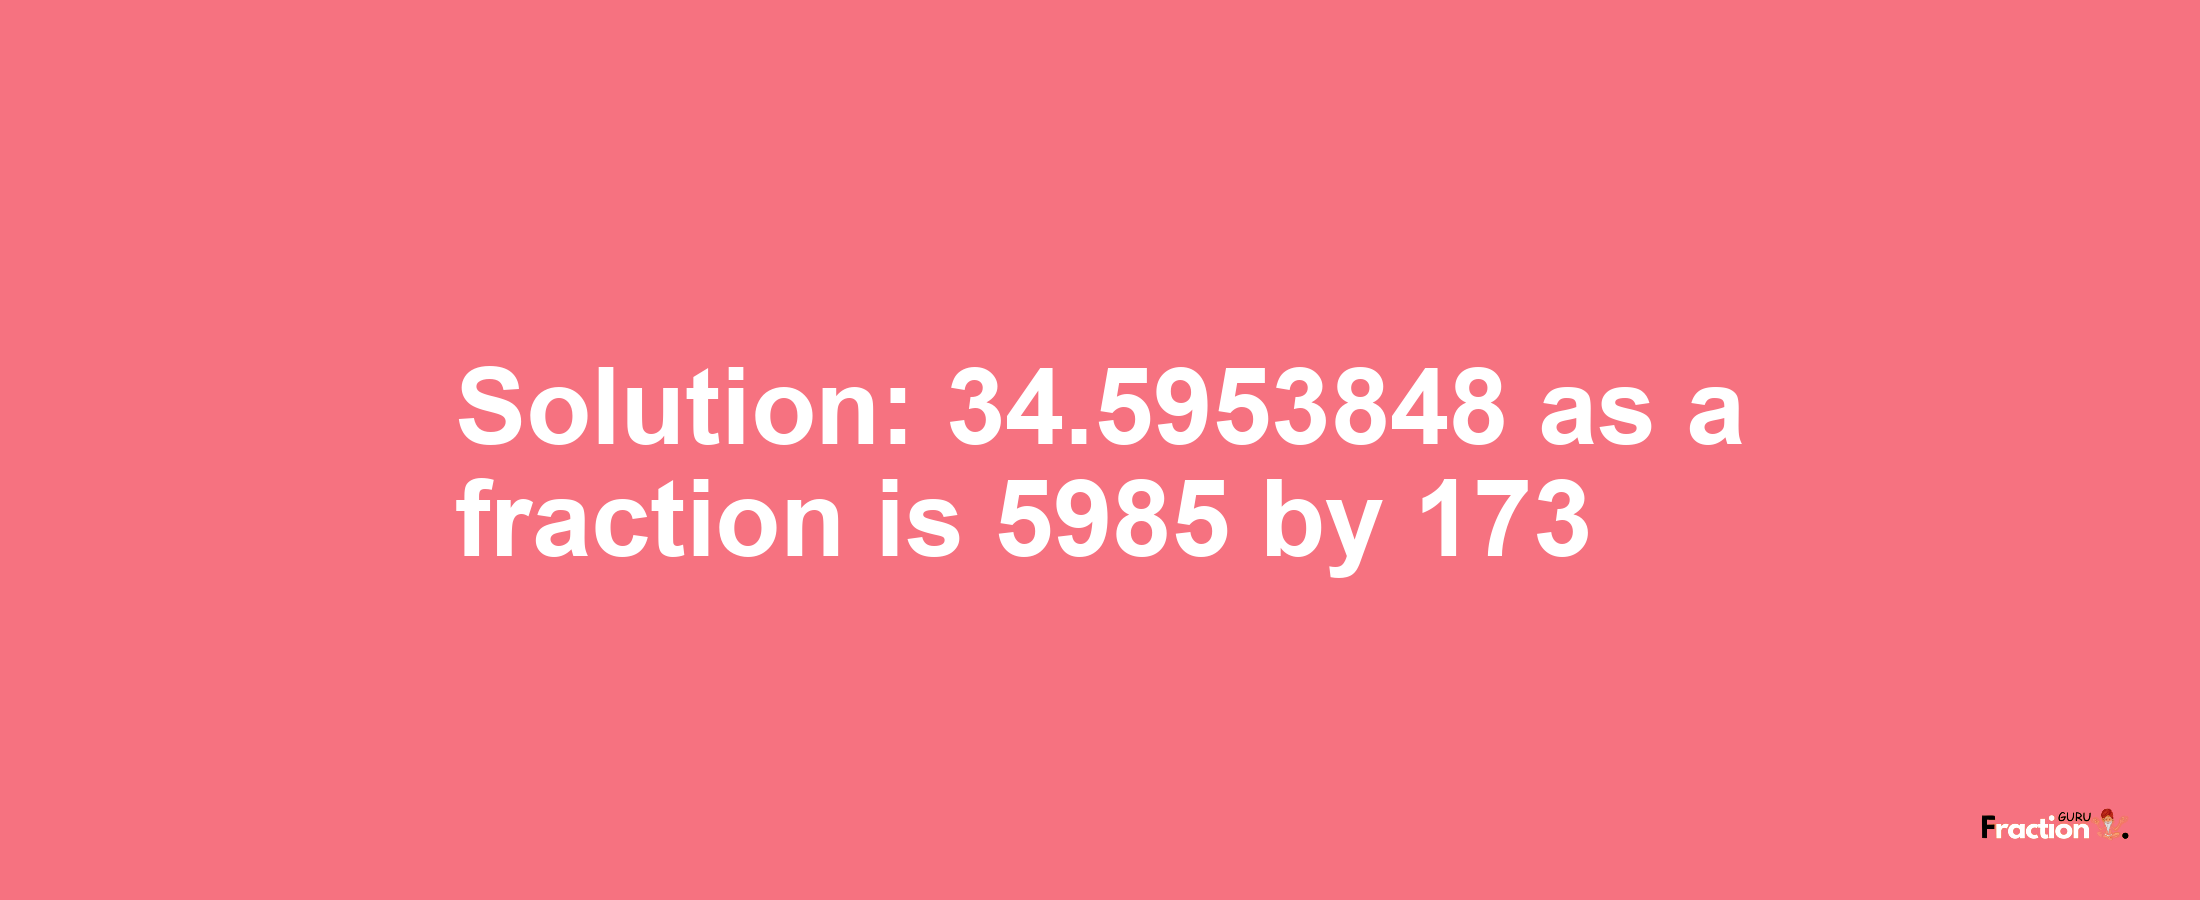 Solution:34.5953848 as a fraction is 5985/173